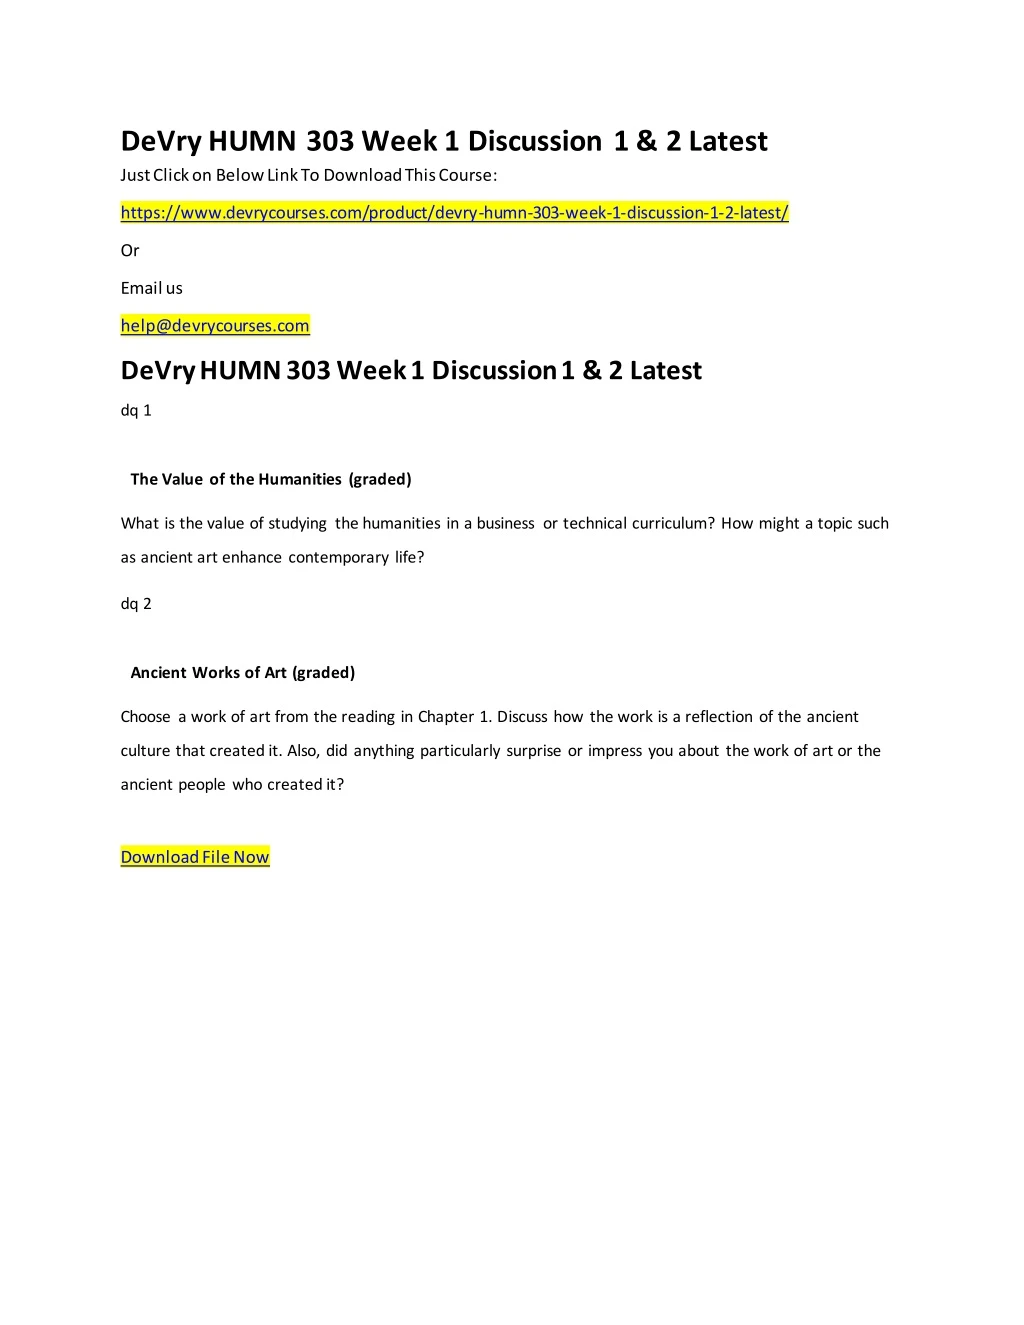 devry humn 303 week 1 discussion 1 2 latest just